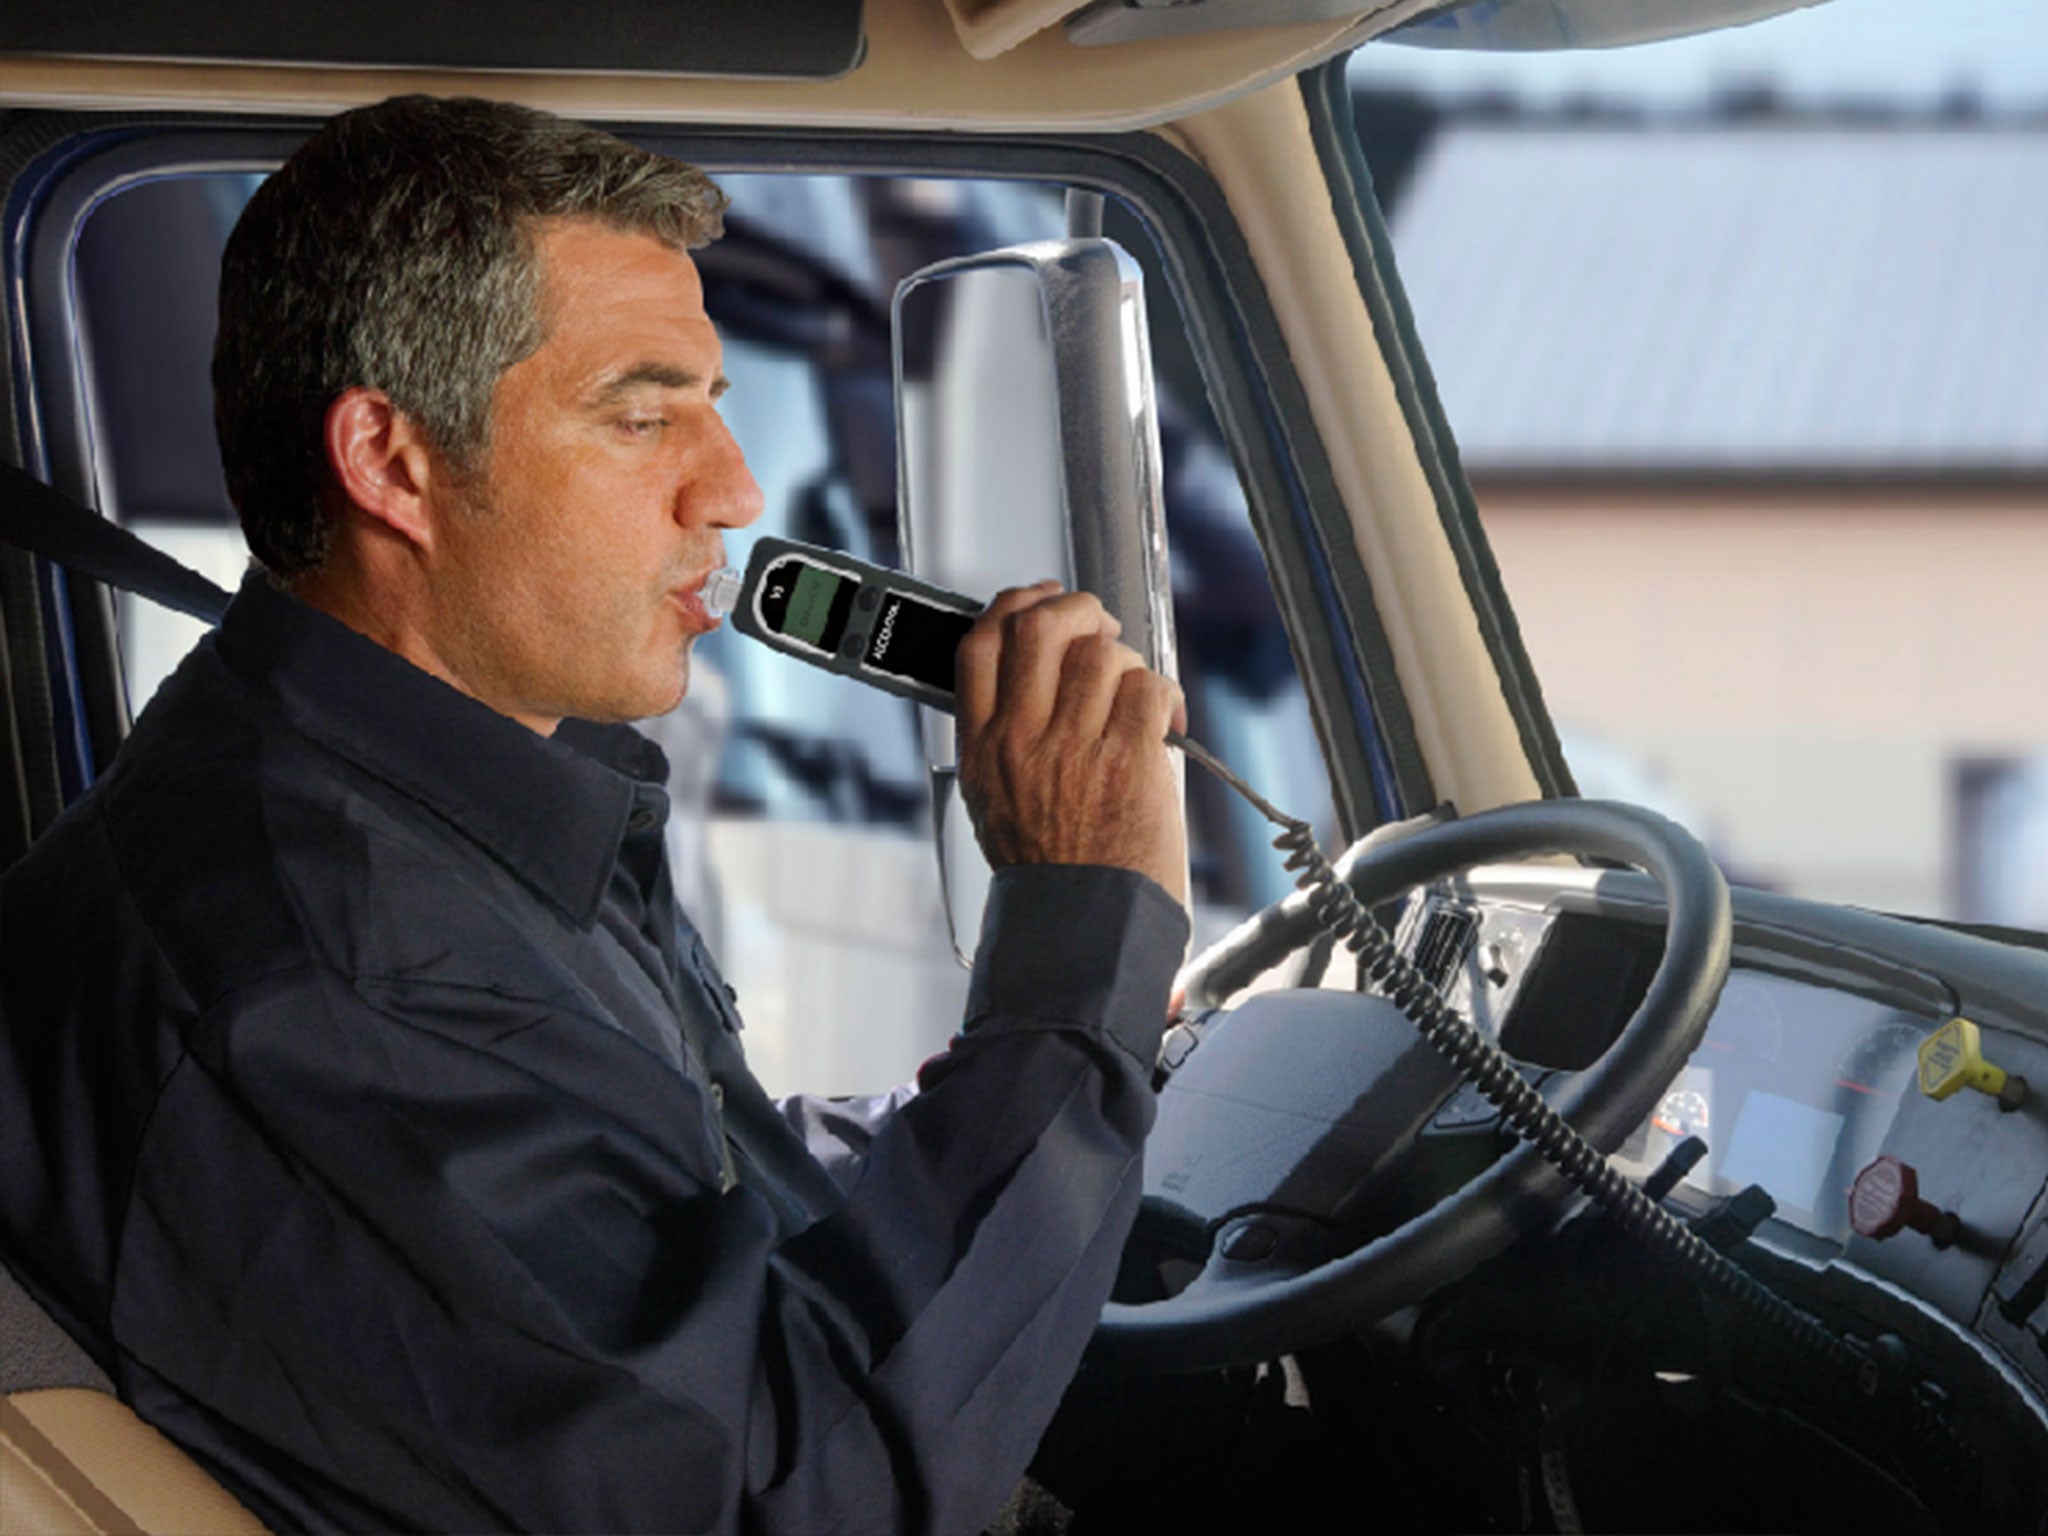 A man uses an in-car breathalyser, which is backed by an EU body